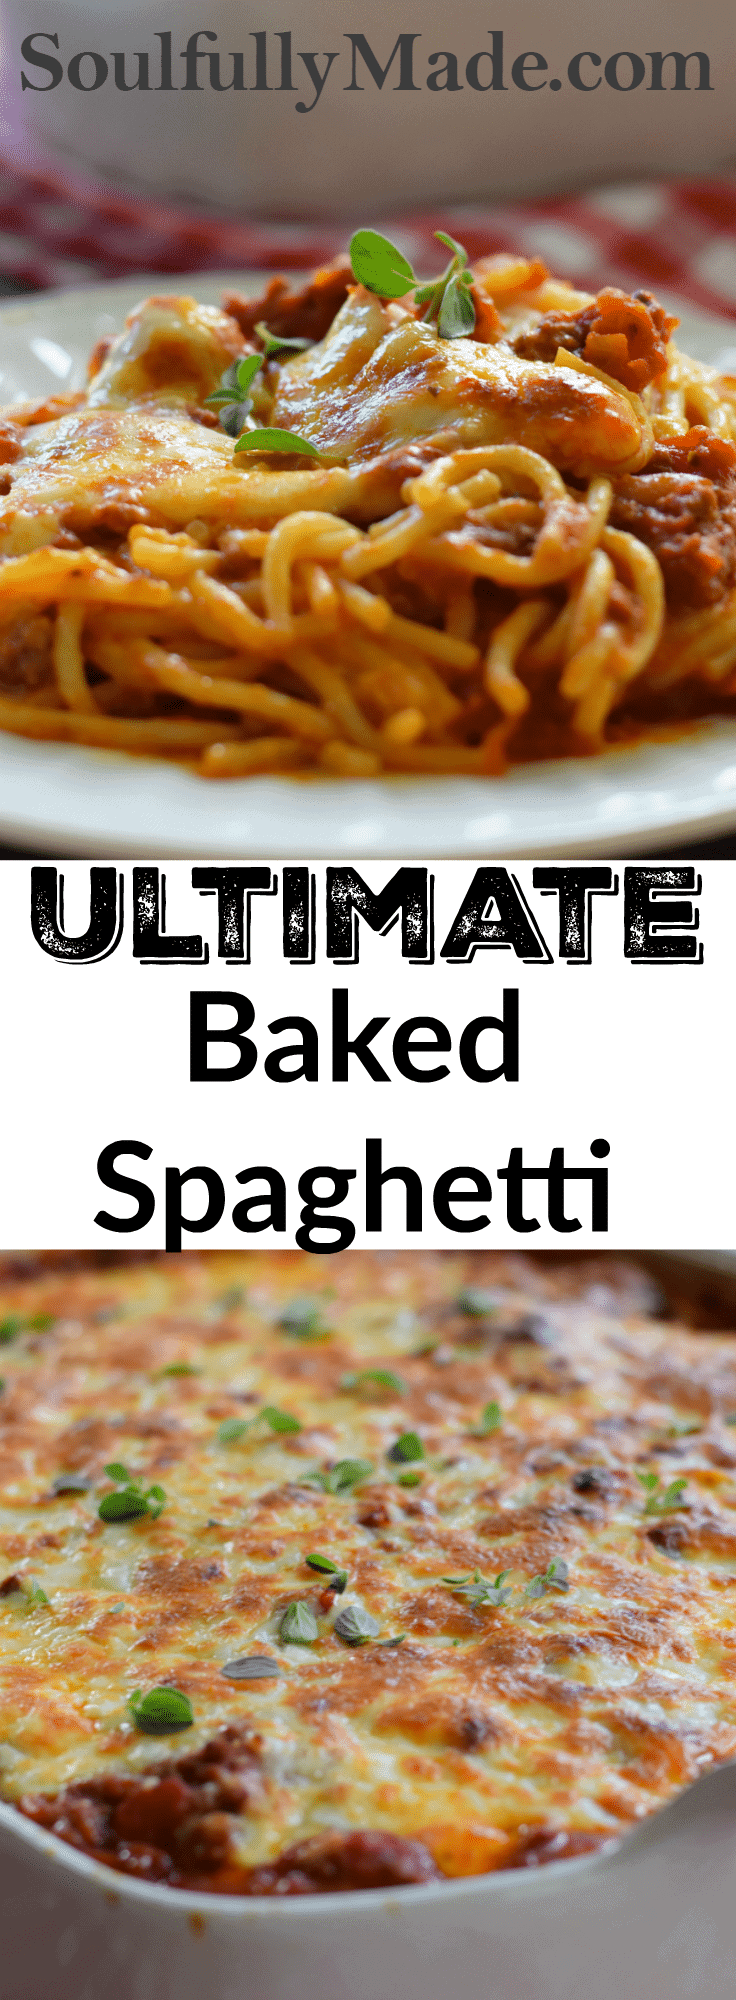 the pitnerest image for this ultimate baked spaghetti recipe